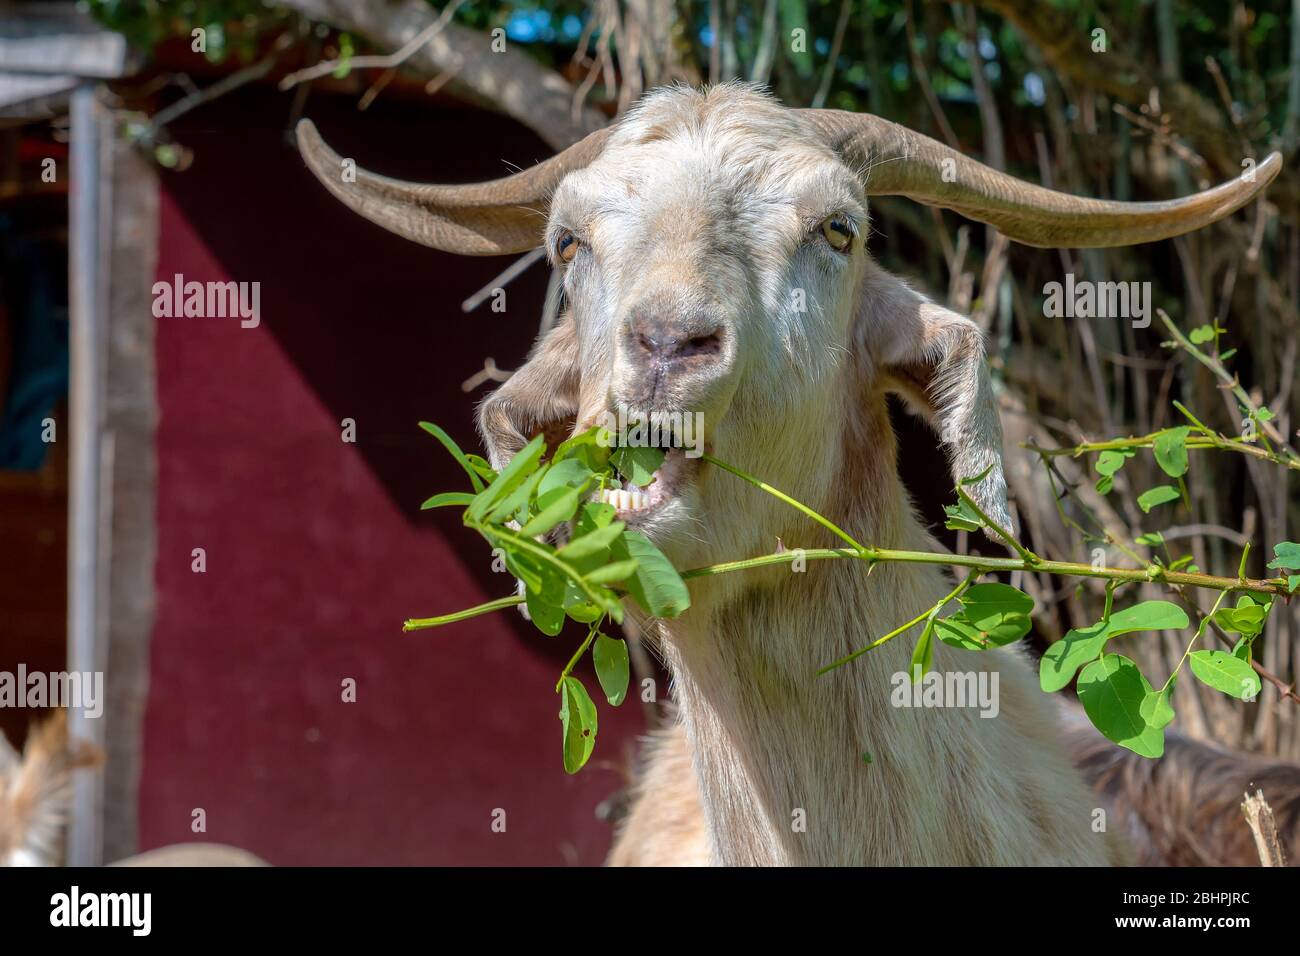 A goat chewing leaves off a branch. His mouth is open and you can see leaves in his mouth. Horns sweep back from his head. Red barn outside depth of f Stock Photo